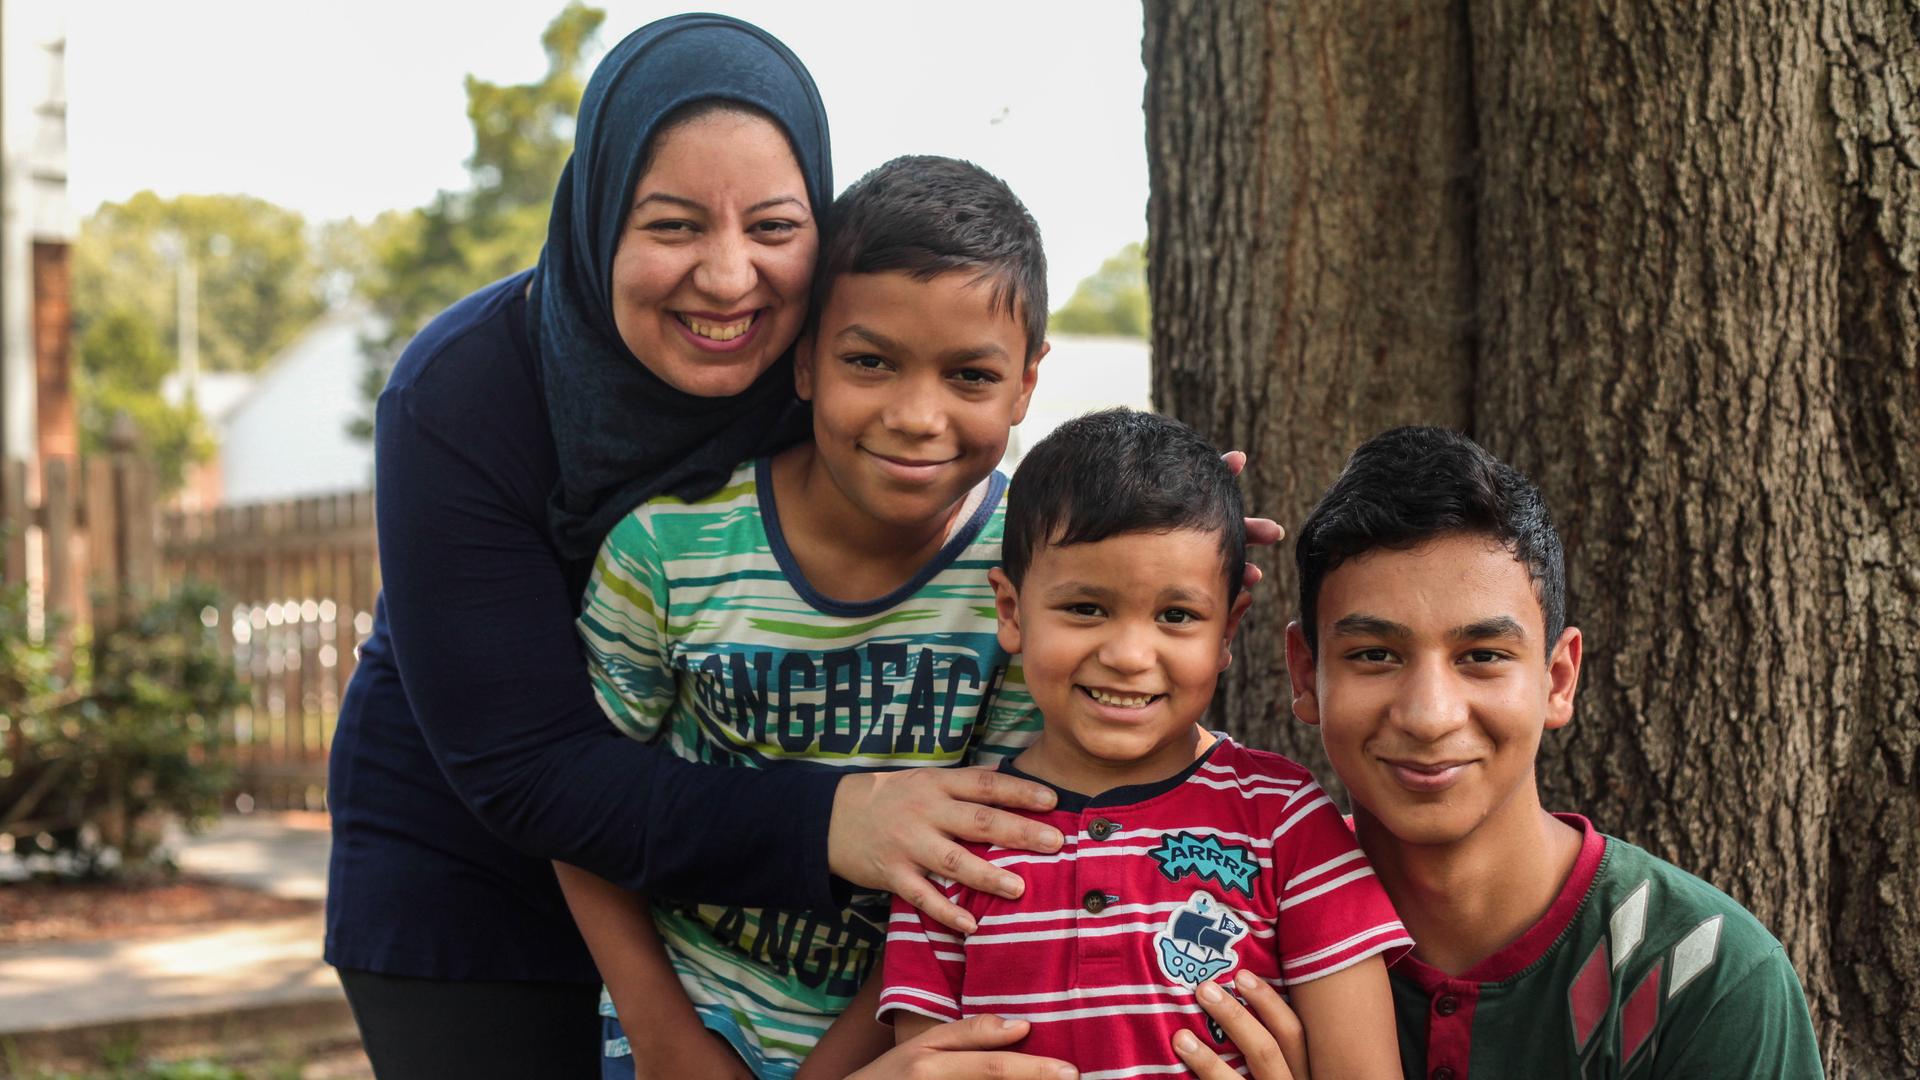 A woman in a hijab smiles and poses with three boys ranging in age 